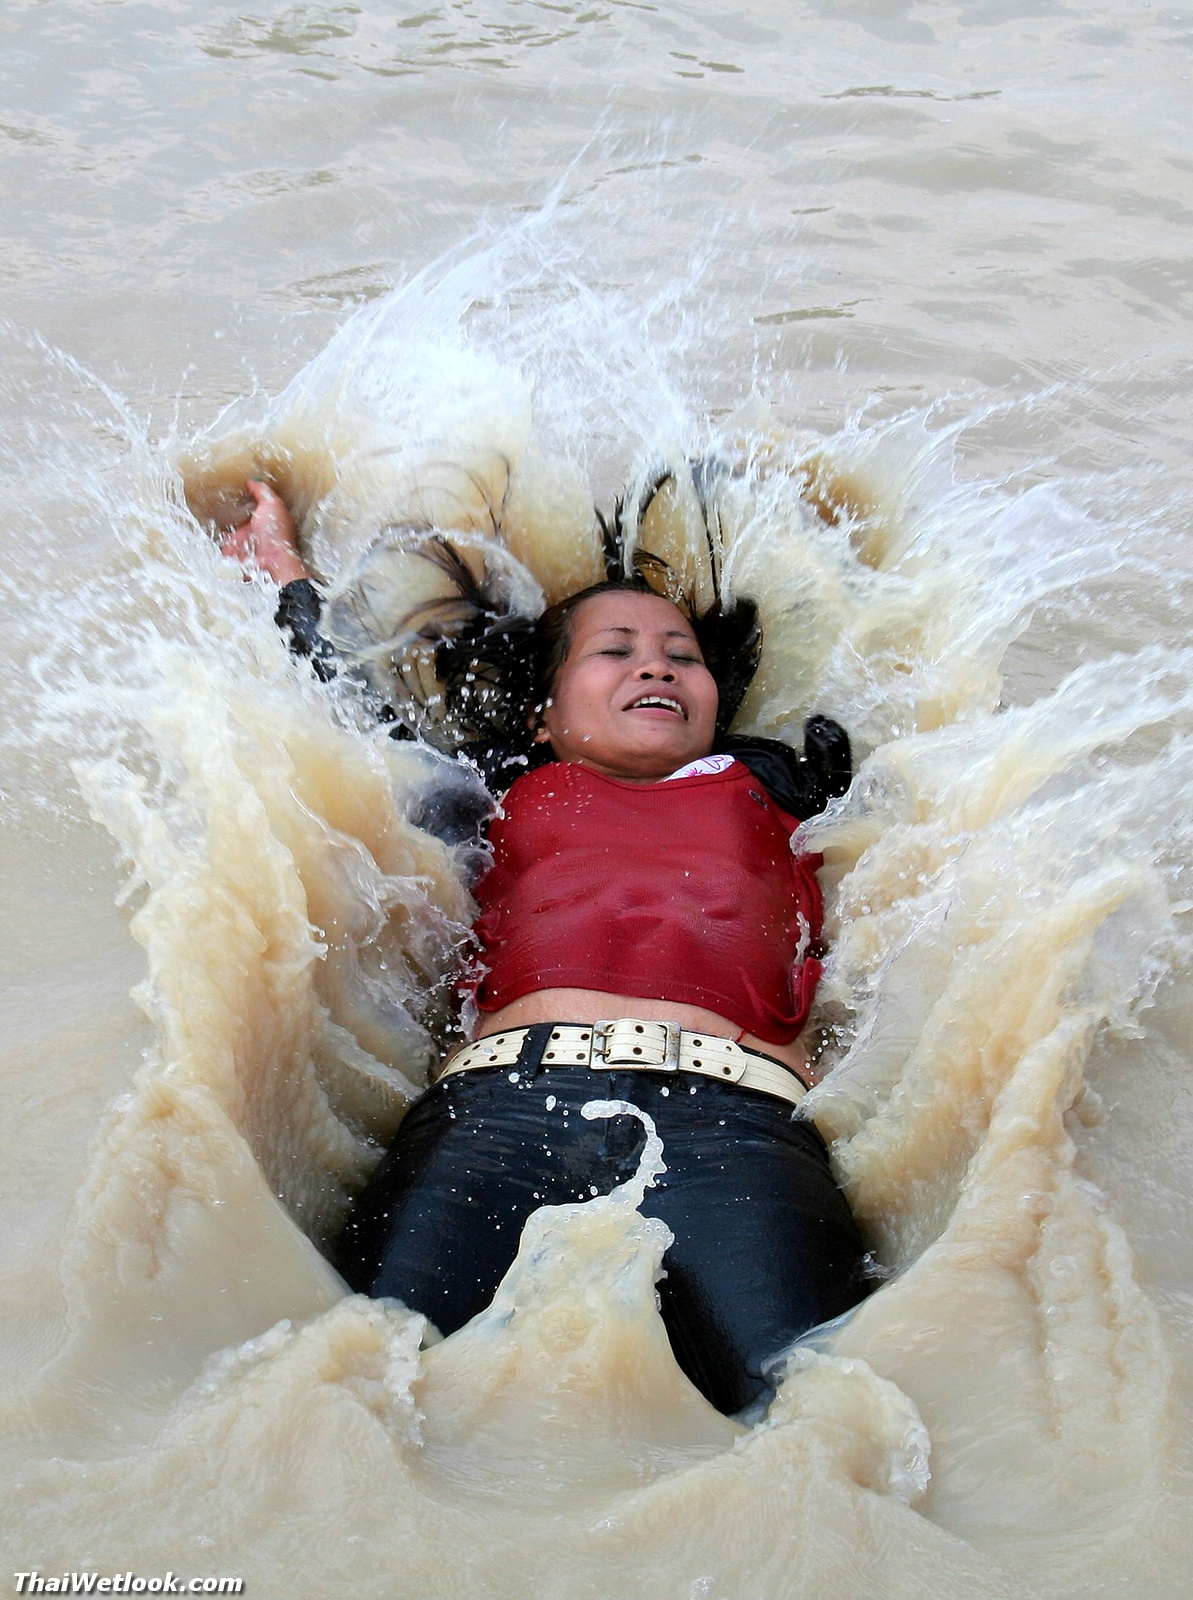 Two Girls Begin In Jeans Jacket And A White Skirt But End Up In Hotpants And Muddy Water